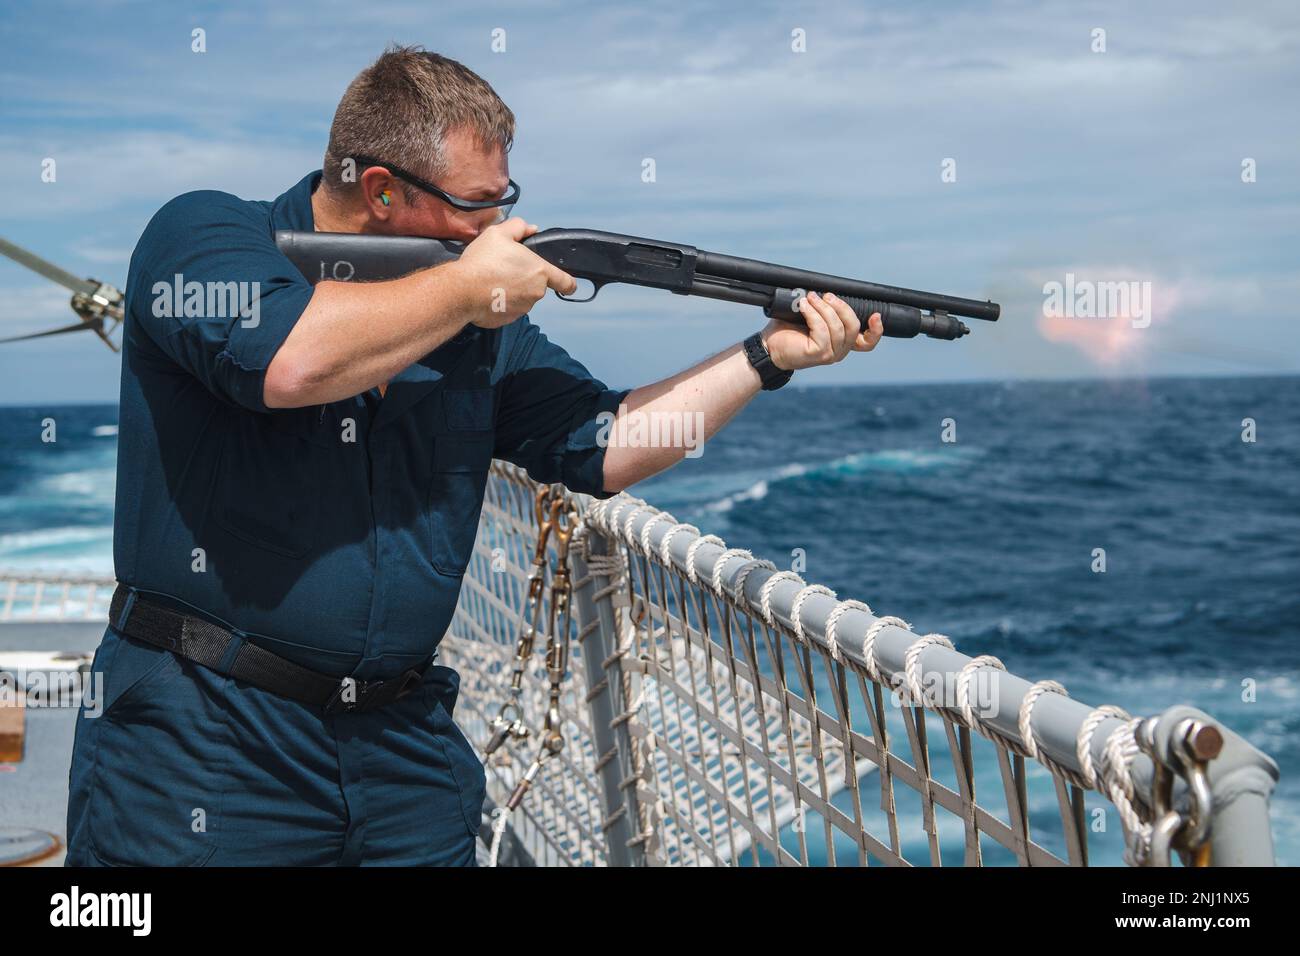 220804-N-TT059-1027  INDIAN OCEAN (August 4, 2022) Master-at-Arms 1st Class Matthew Barksdale fires an M500 shotgun during an at-sea gun range on the flight deck aboard Arleigh Burke-class guided-missile destroyer USS Momsen (DDG 92) in the Indian Ocean, August 4. USS Momsen is assigned to Commander, Task Force 71/Destroyer Squadron (DESRON) 15, the Navy's largest forward-deployed DESRON and the U.S. 7th Fleet's principal surface force. Stock Photo